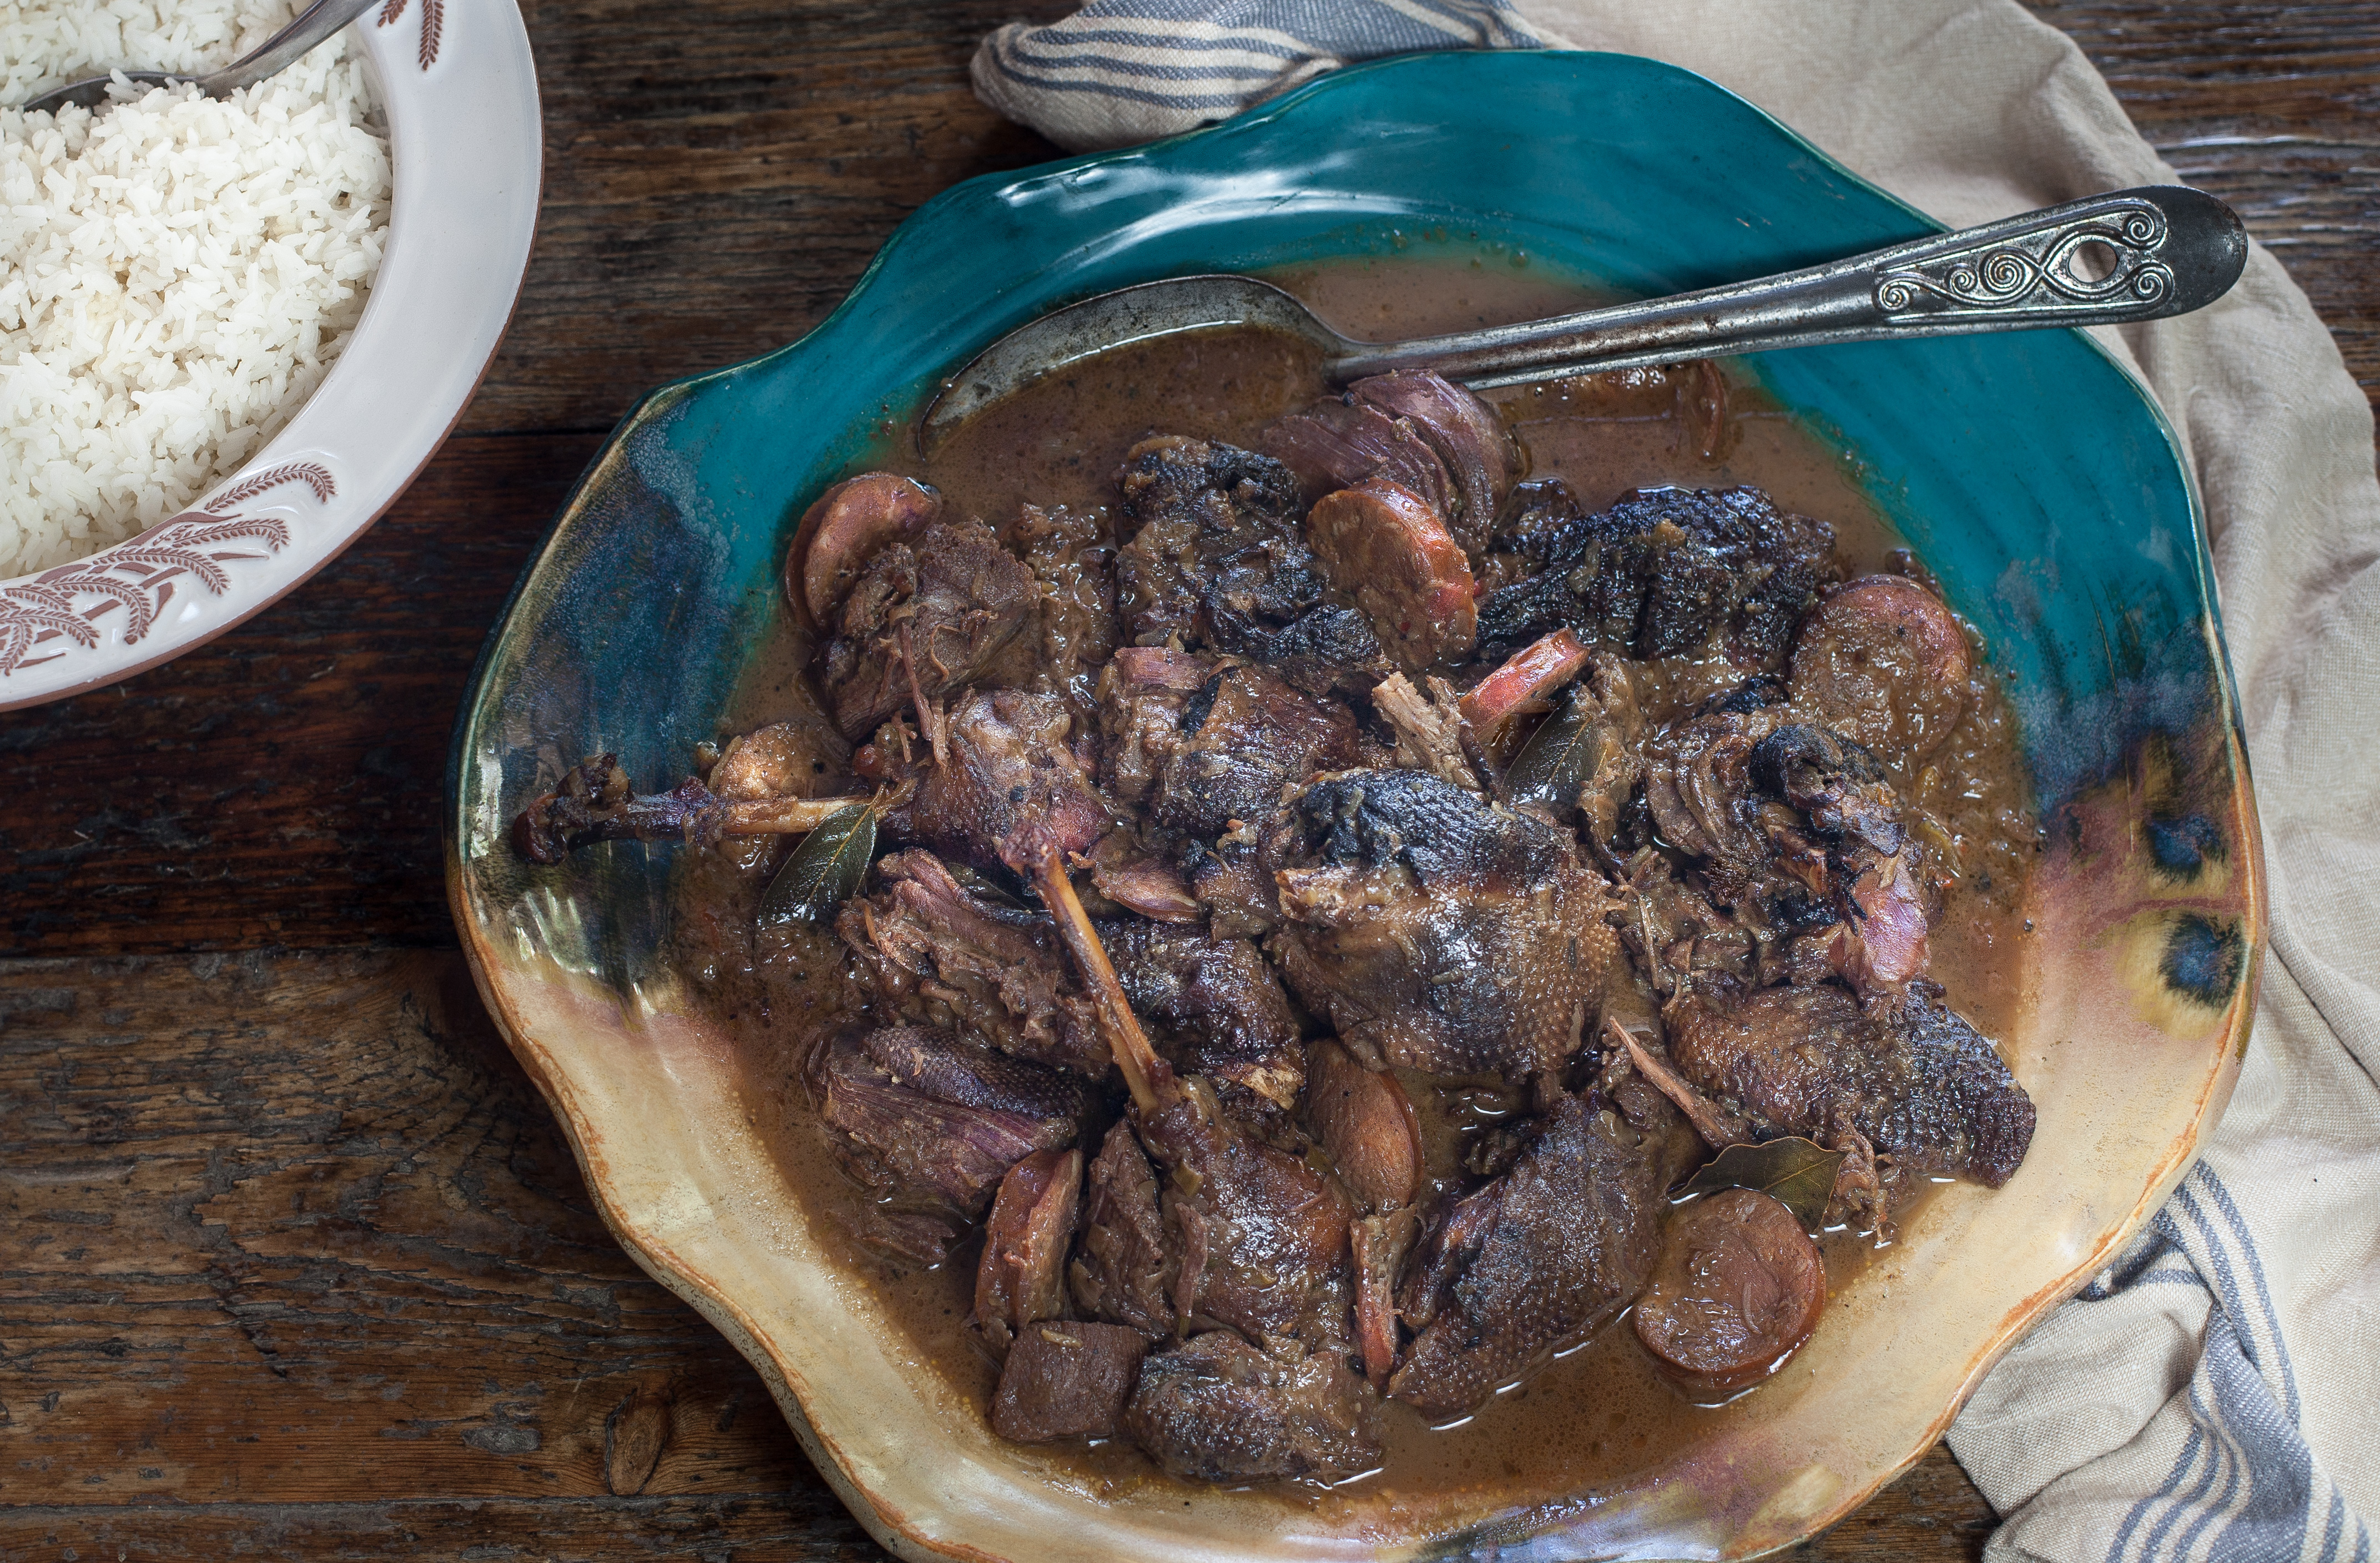 Wild goose stewed down in red wine gravy is a rich and hearty Cajun dinner. (All photos credit: George Graham)